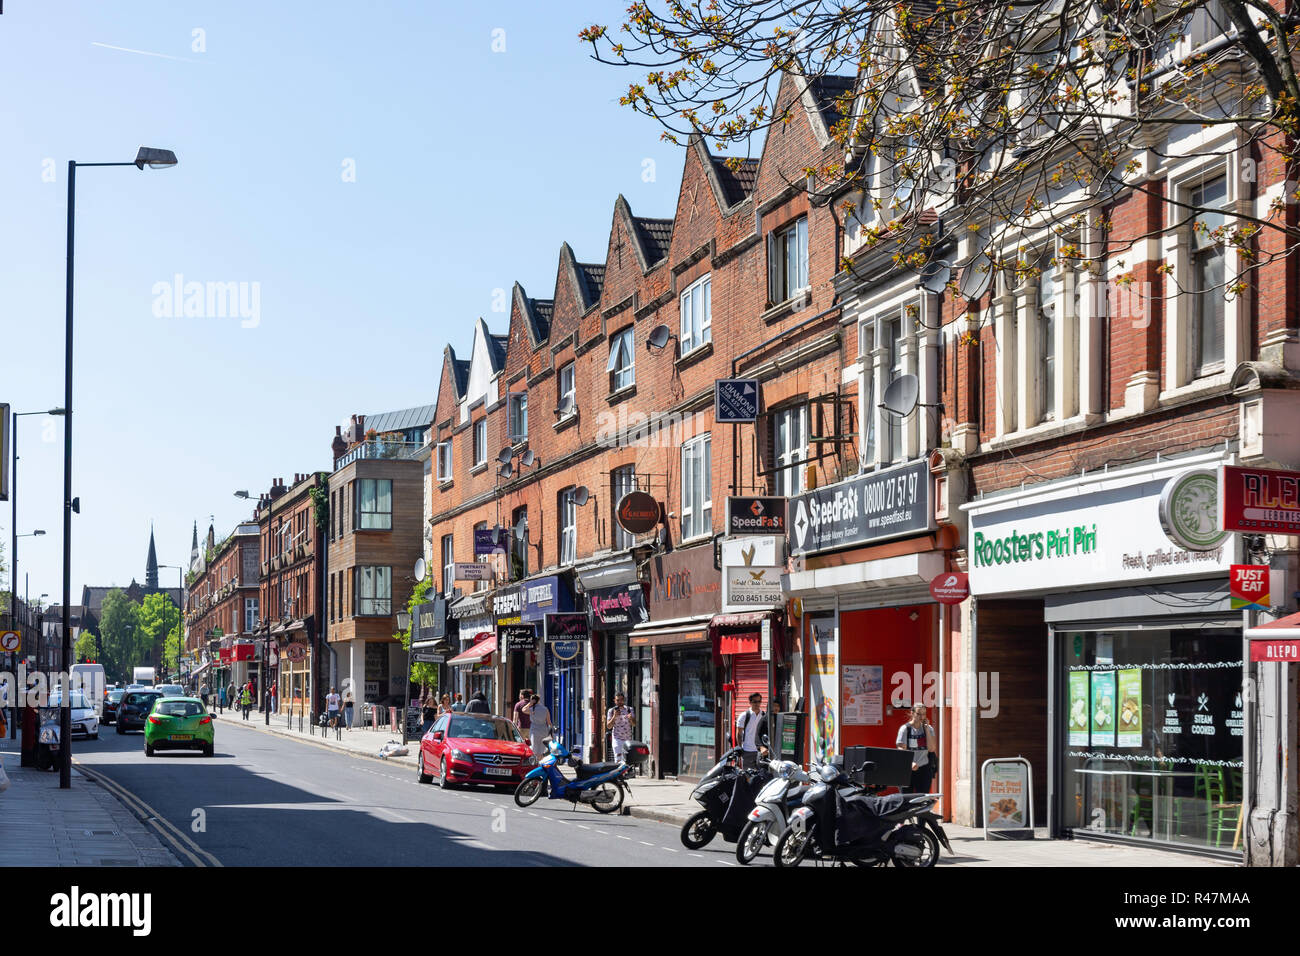 High Road, Willesden Green, Willesden, London Borough of Brent, Greater London, England, United Kingdom Stock Photo